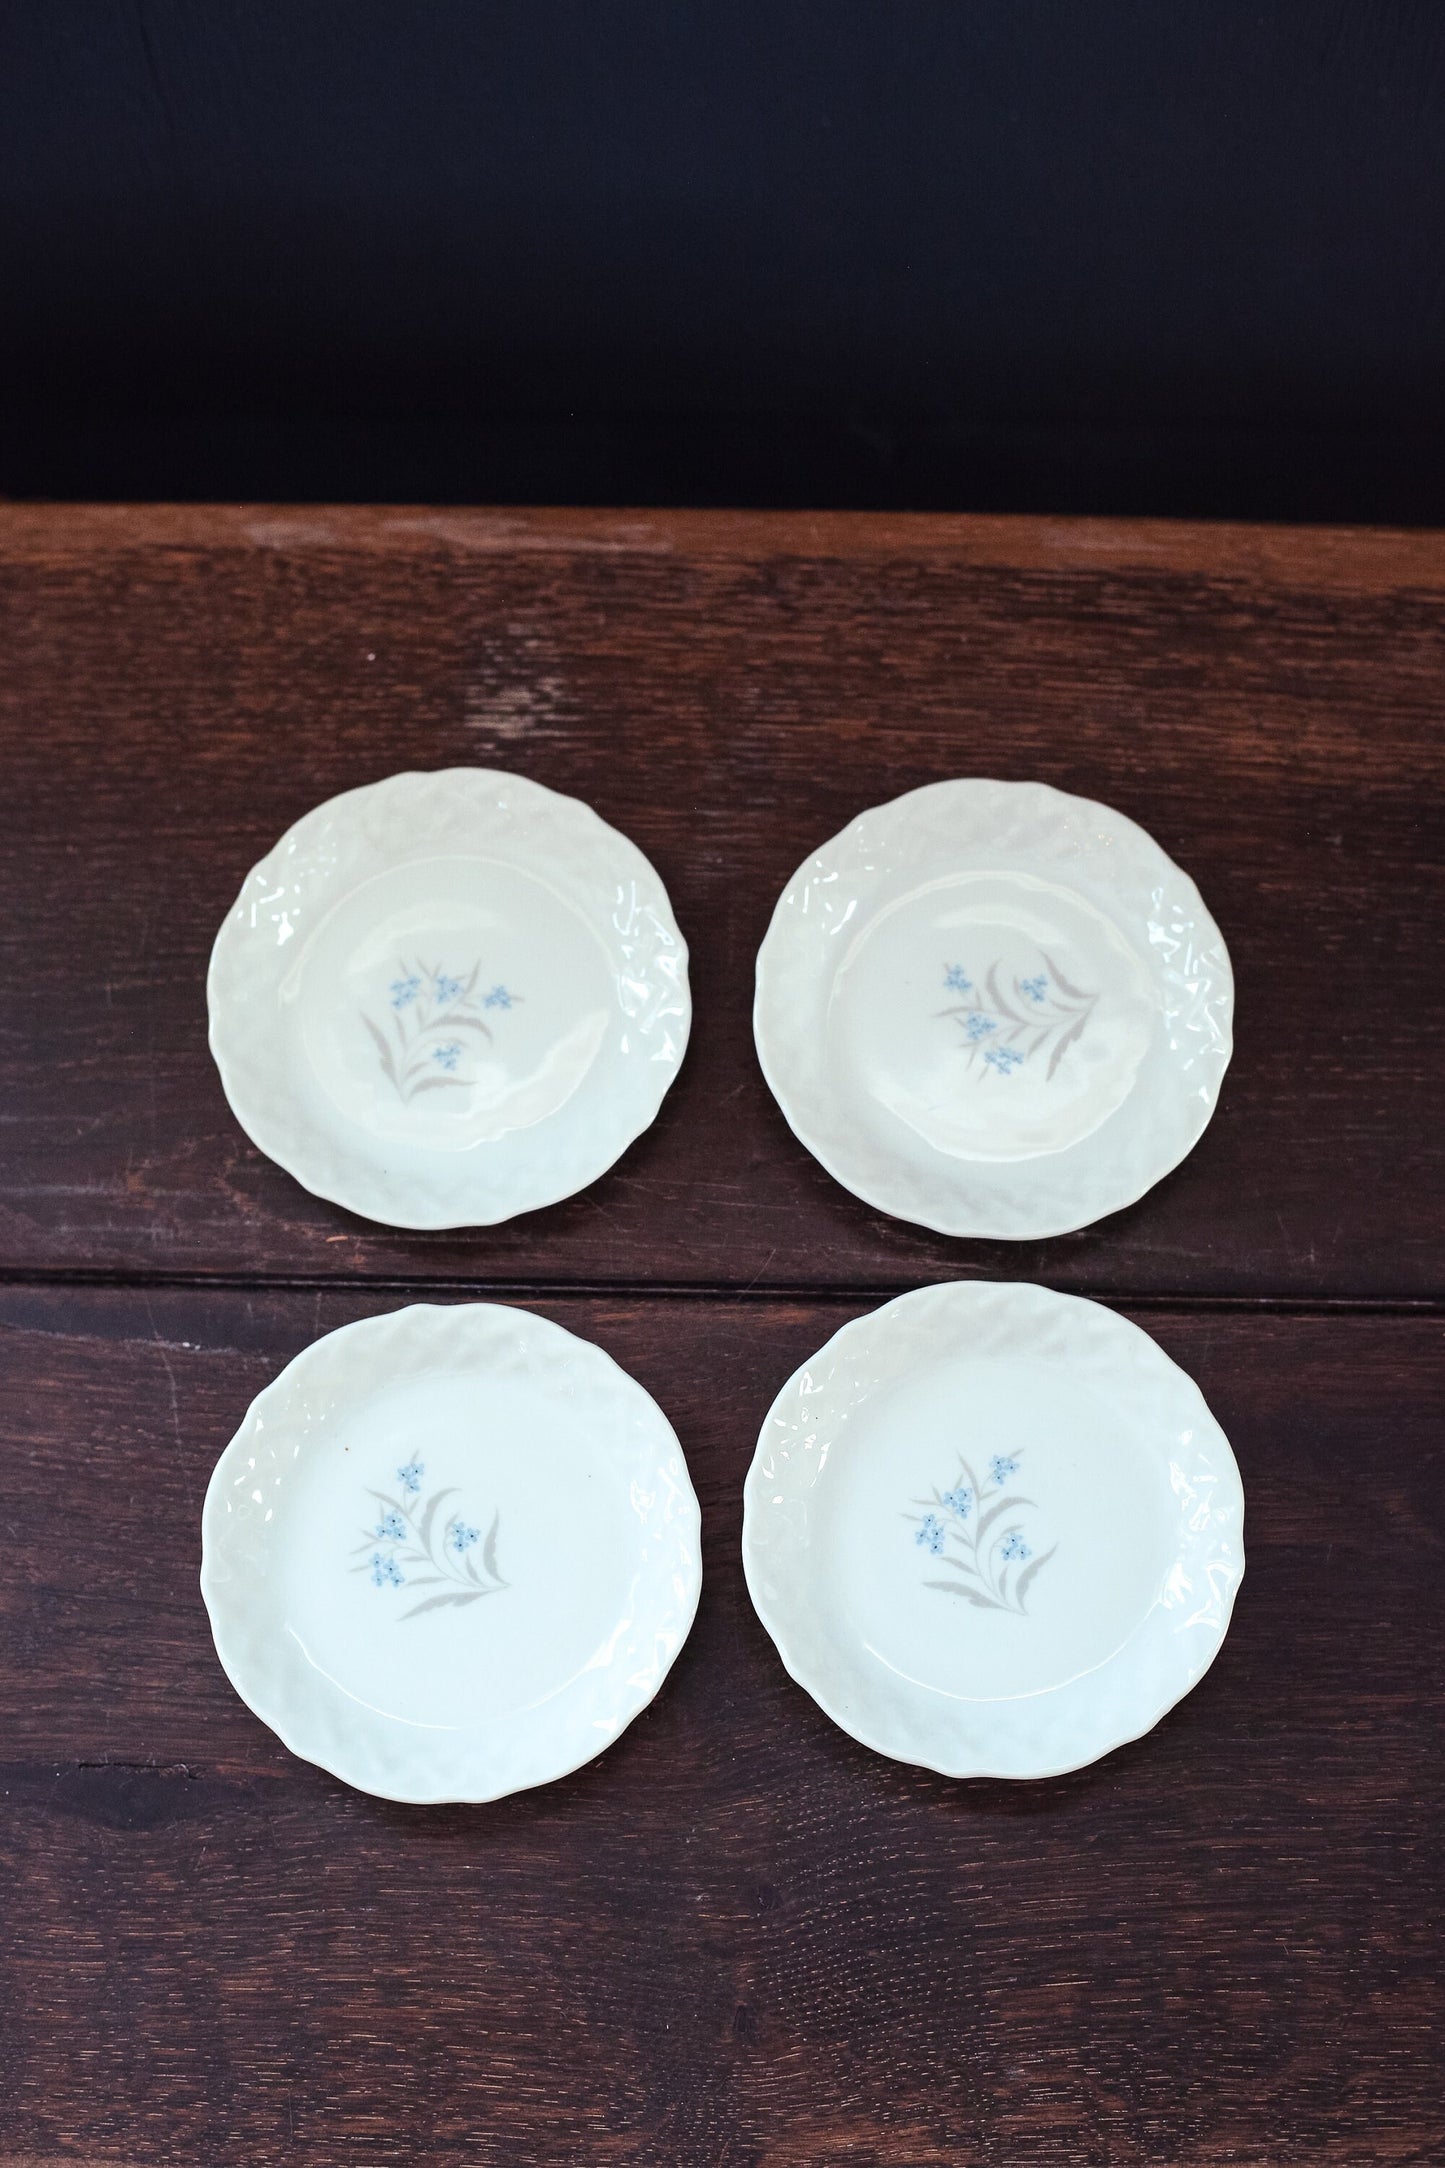 Small Porcelain Plates with Blue & Silver Flowers - Set of 4 Vintage Petite Porcelain Dishes 